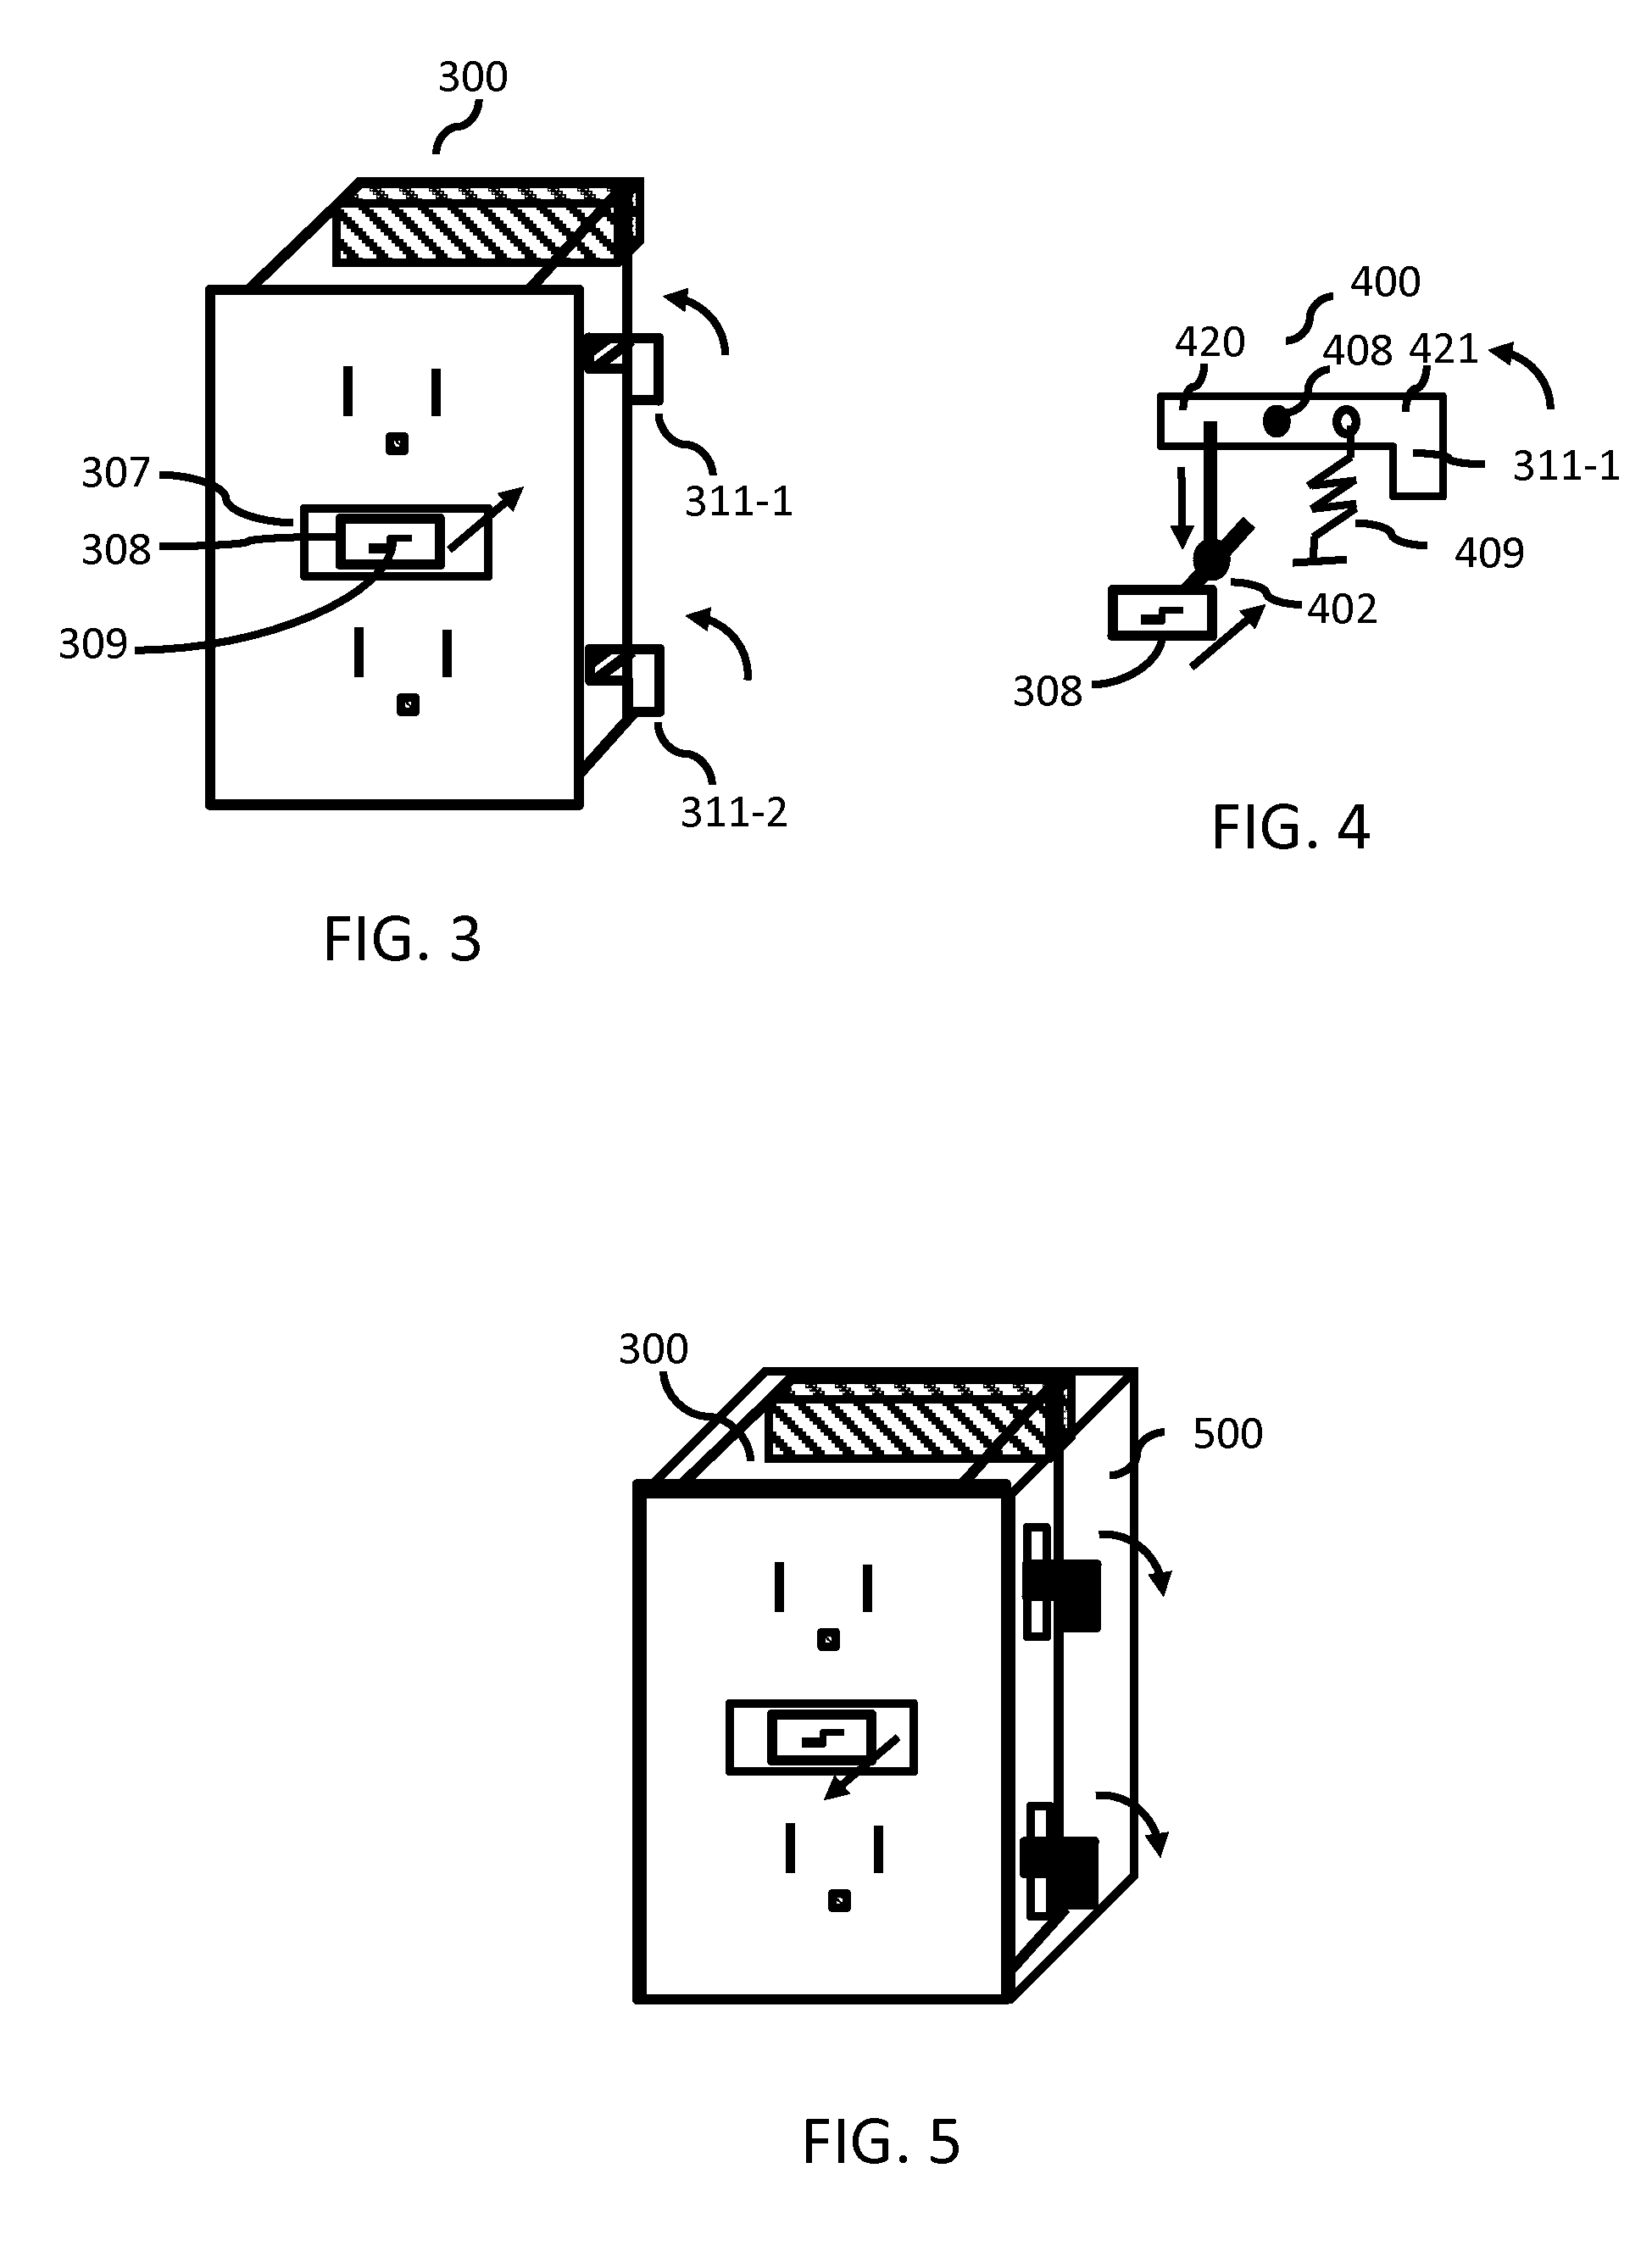 Method and apparatus for providing interchangeable modules such as a power outlet module